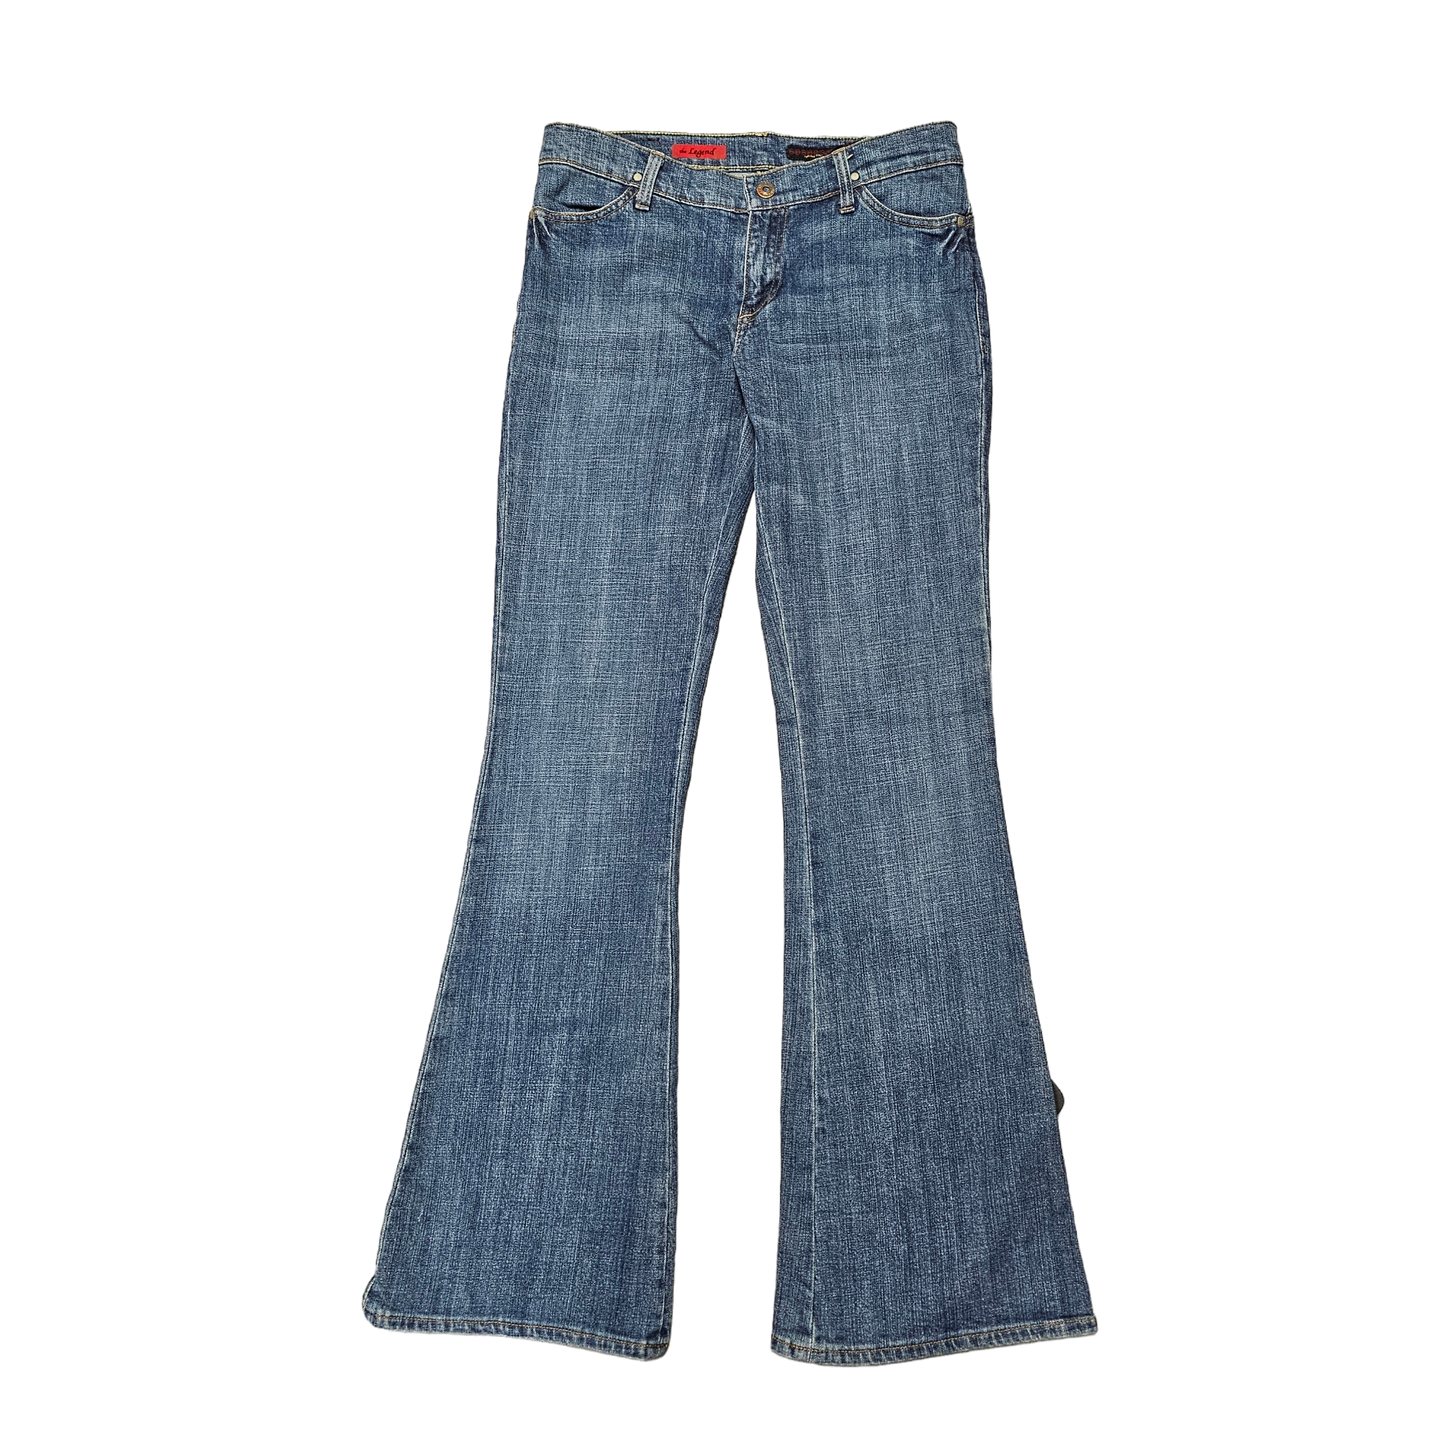 Jeans Flared By Adriano Goldschmied  Size: 29